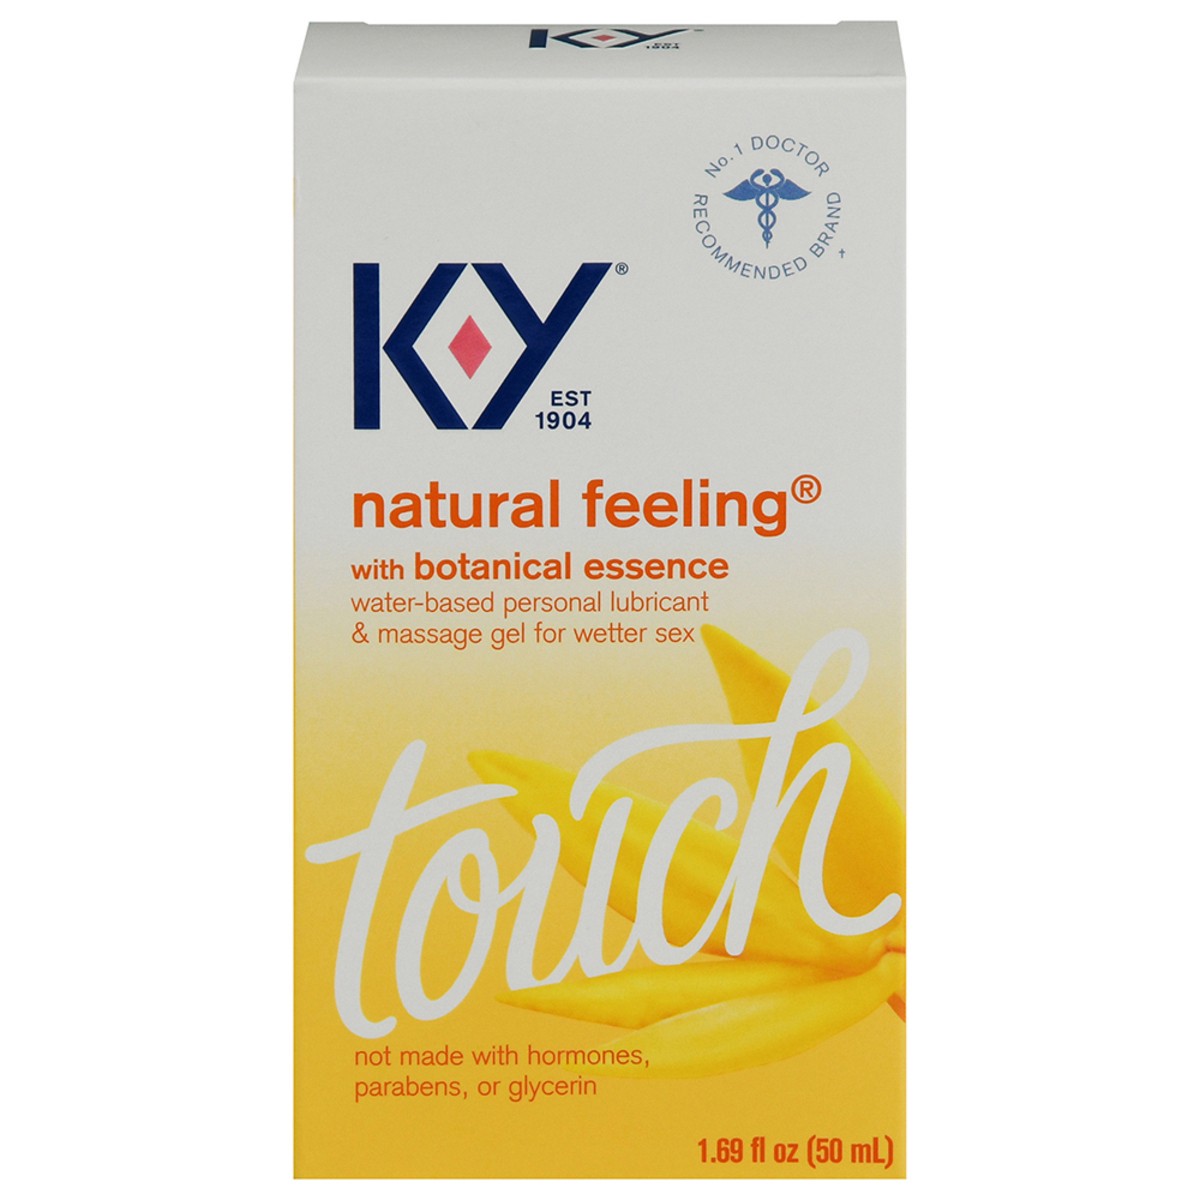 slide 1 of 9, K-Y Natural Feeling Lube with Botanical Essence, Personal Lubricant and Massage Gel, Water-Based Formula, Safe to Use with Silicone Toys and Condoms, For Men, Women and Couples, 1.69 FL OZ, 1.69 fl oz